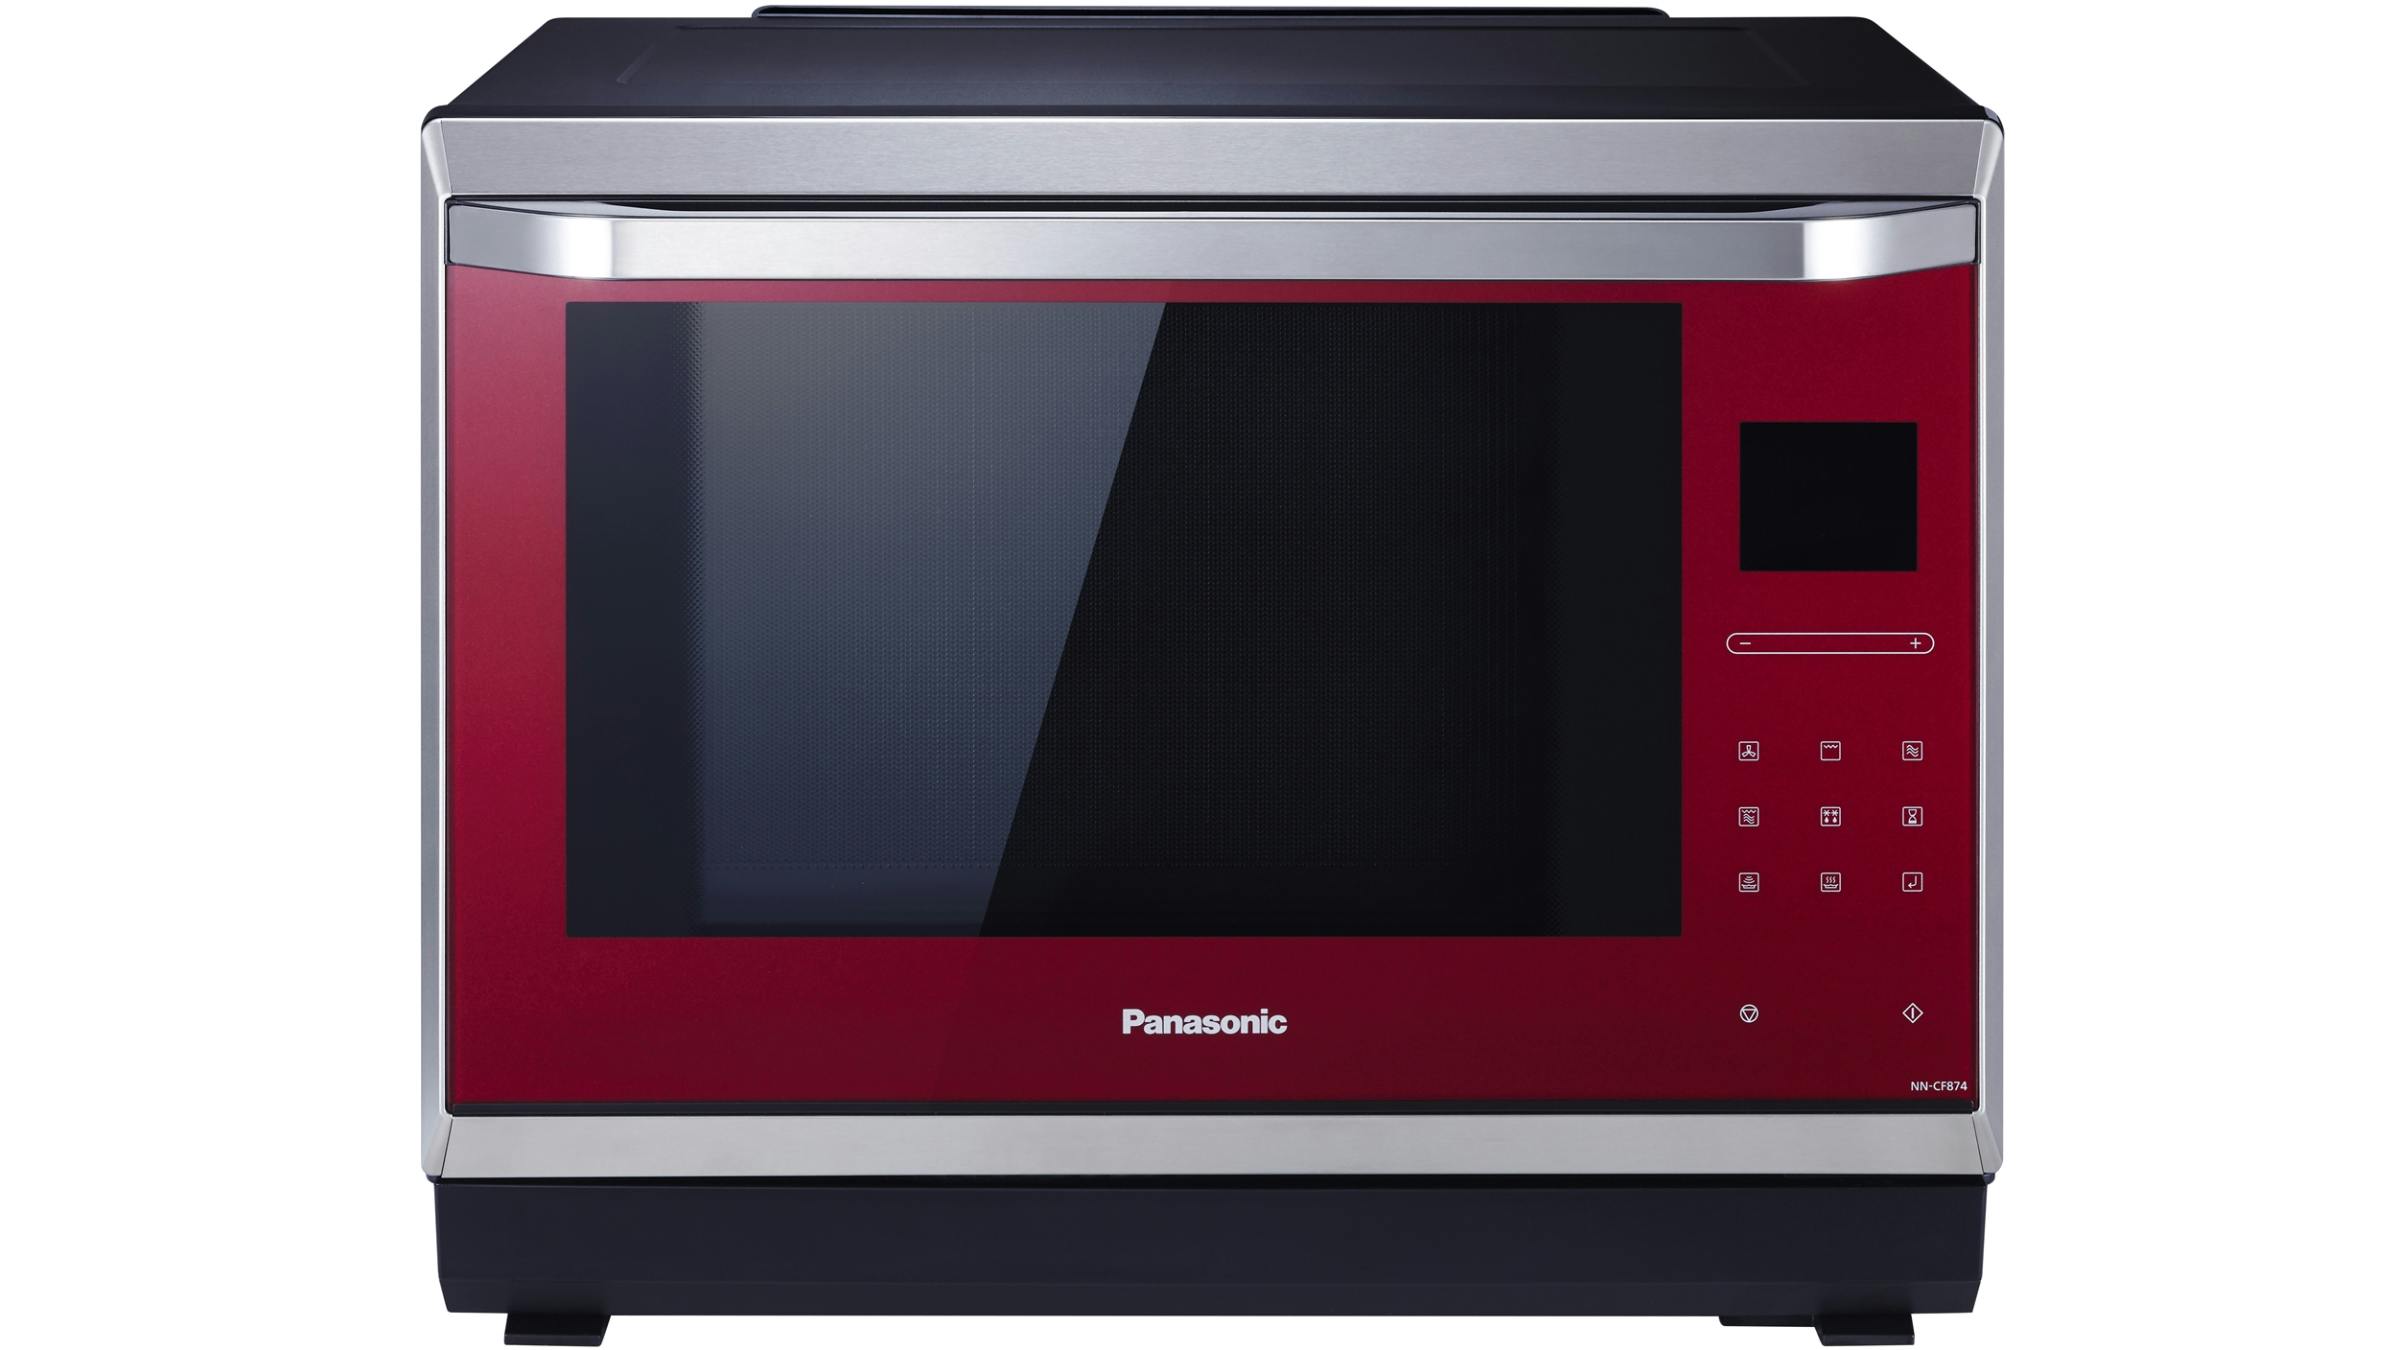 Panasonic 32L Inverter Convection Microwave Oven - Red | Harvey Norman